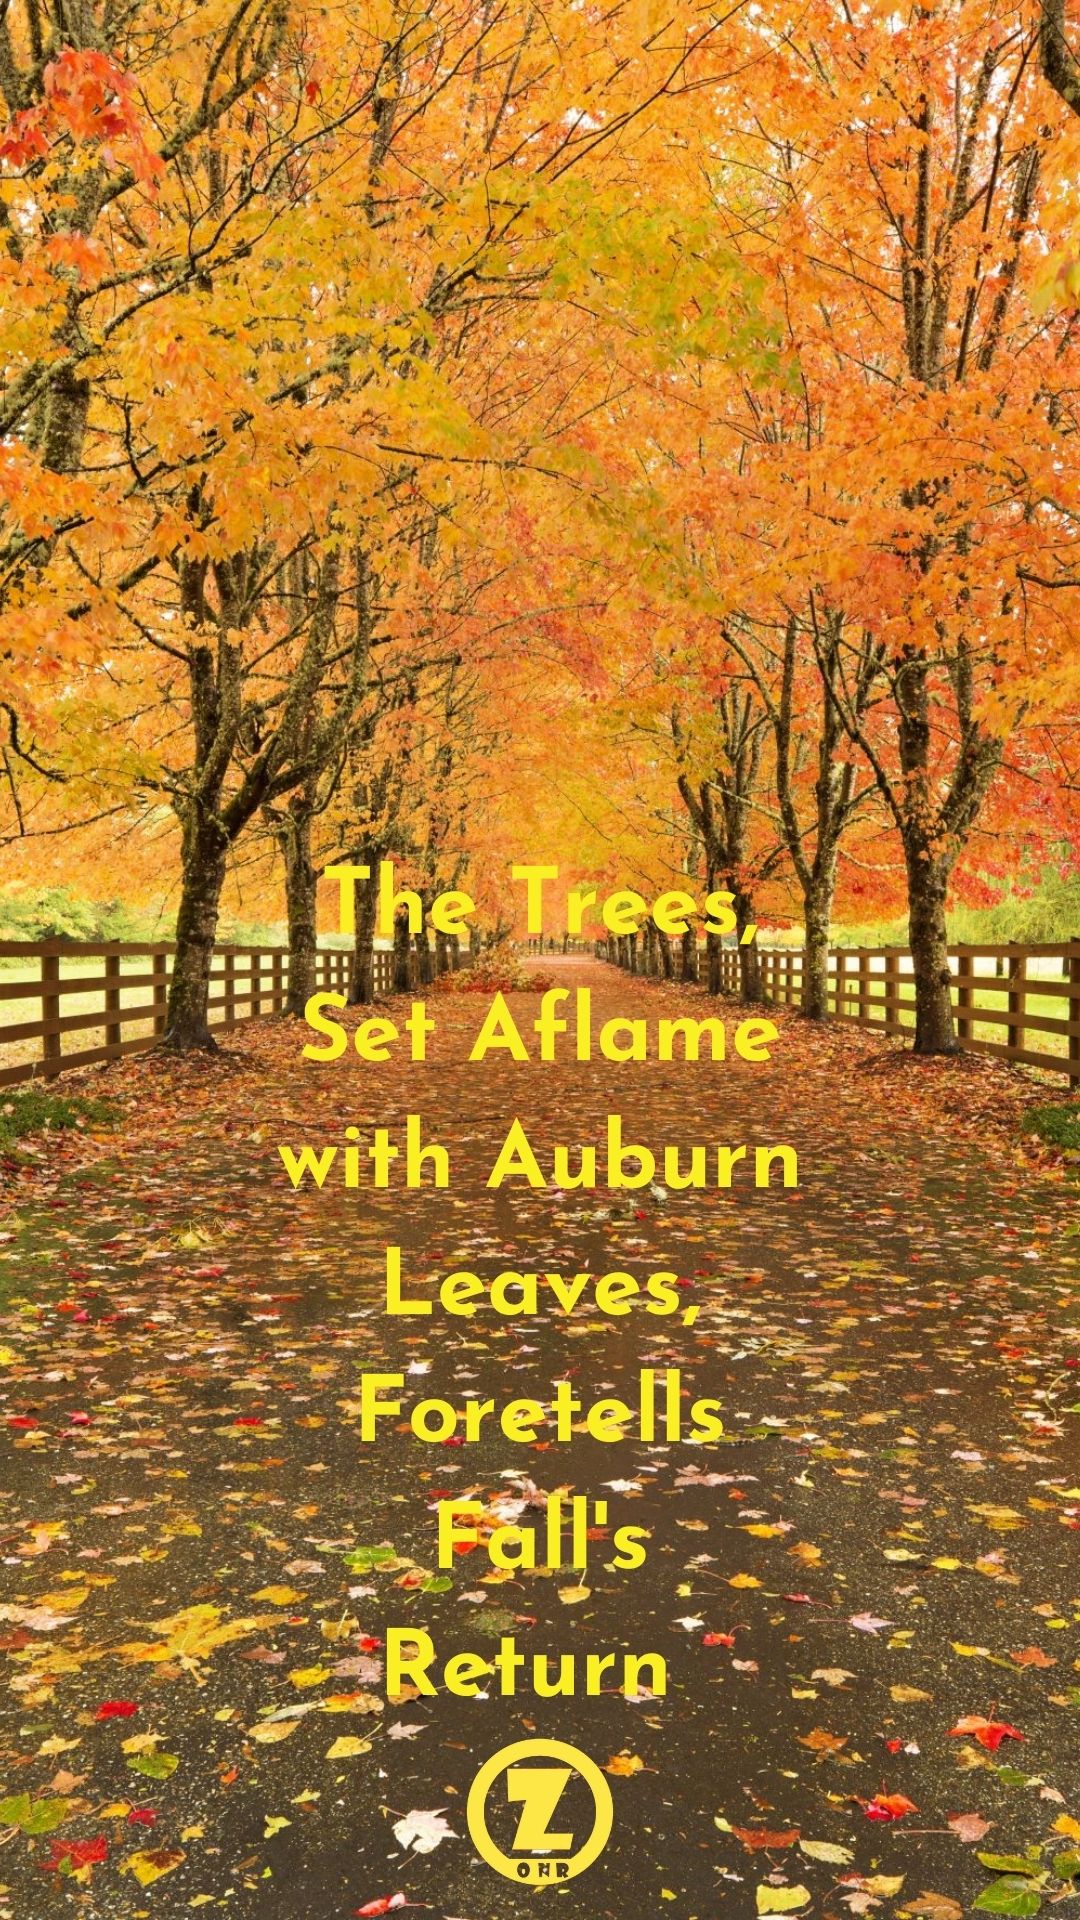 You are currently viewing The Trees, Set Aflame with Auburn Leaves, Foretells Fall’s Return – Step 6